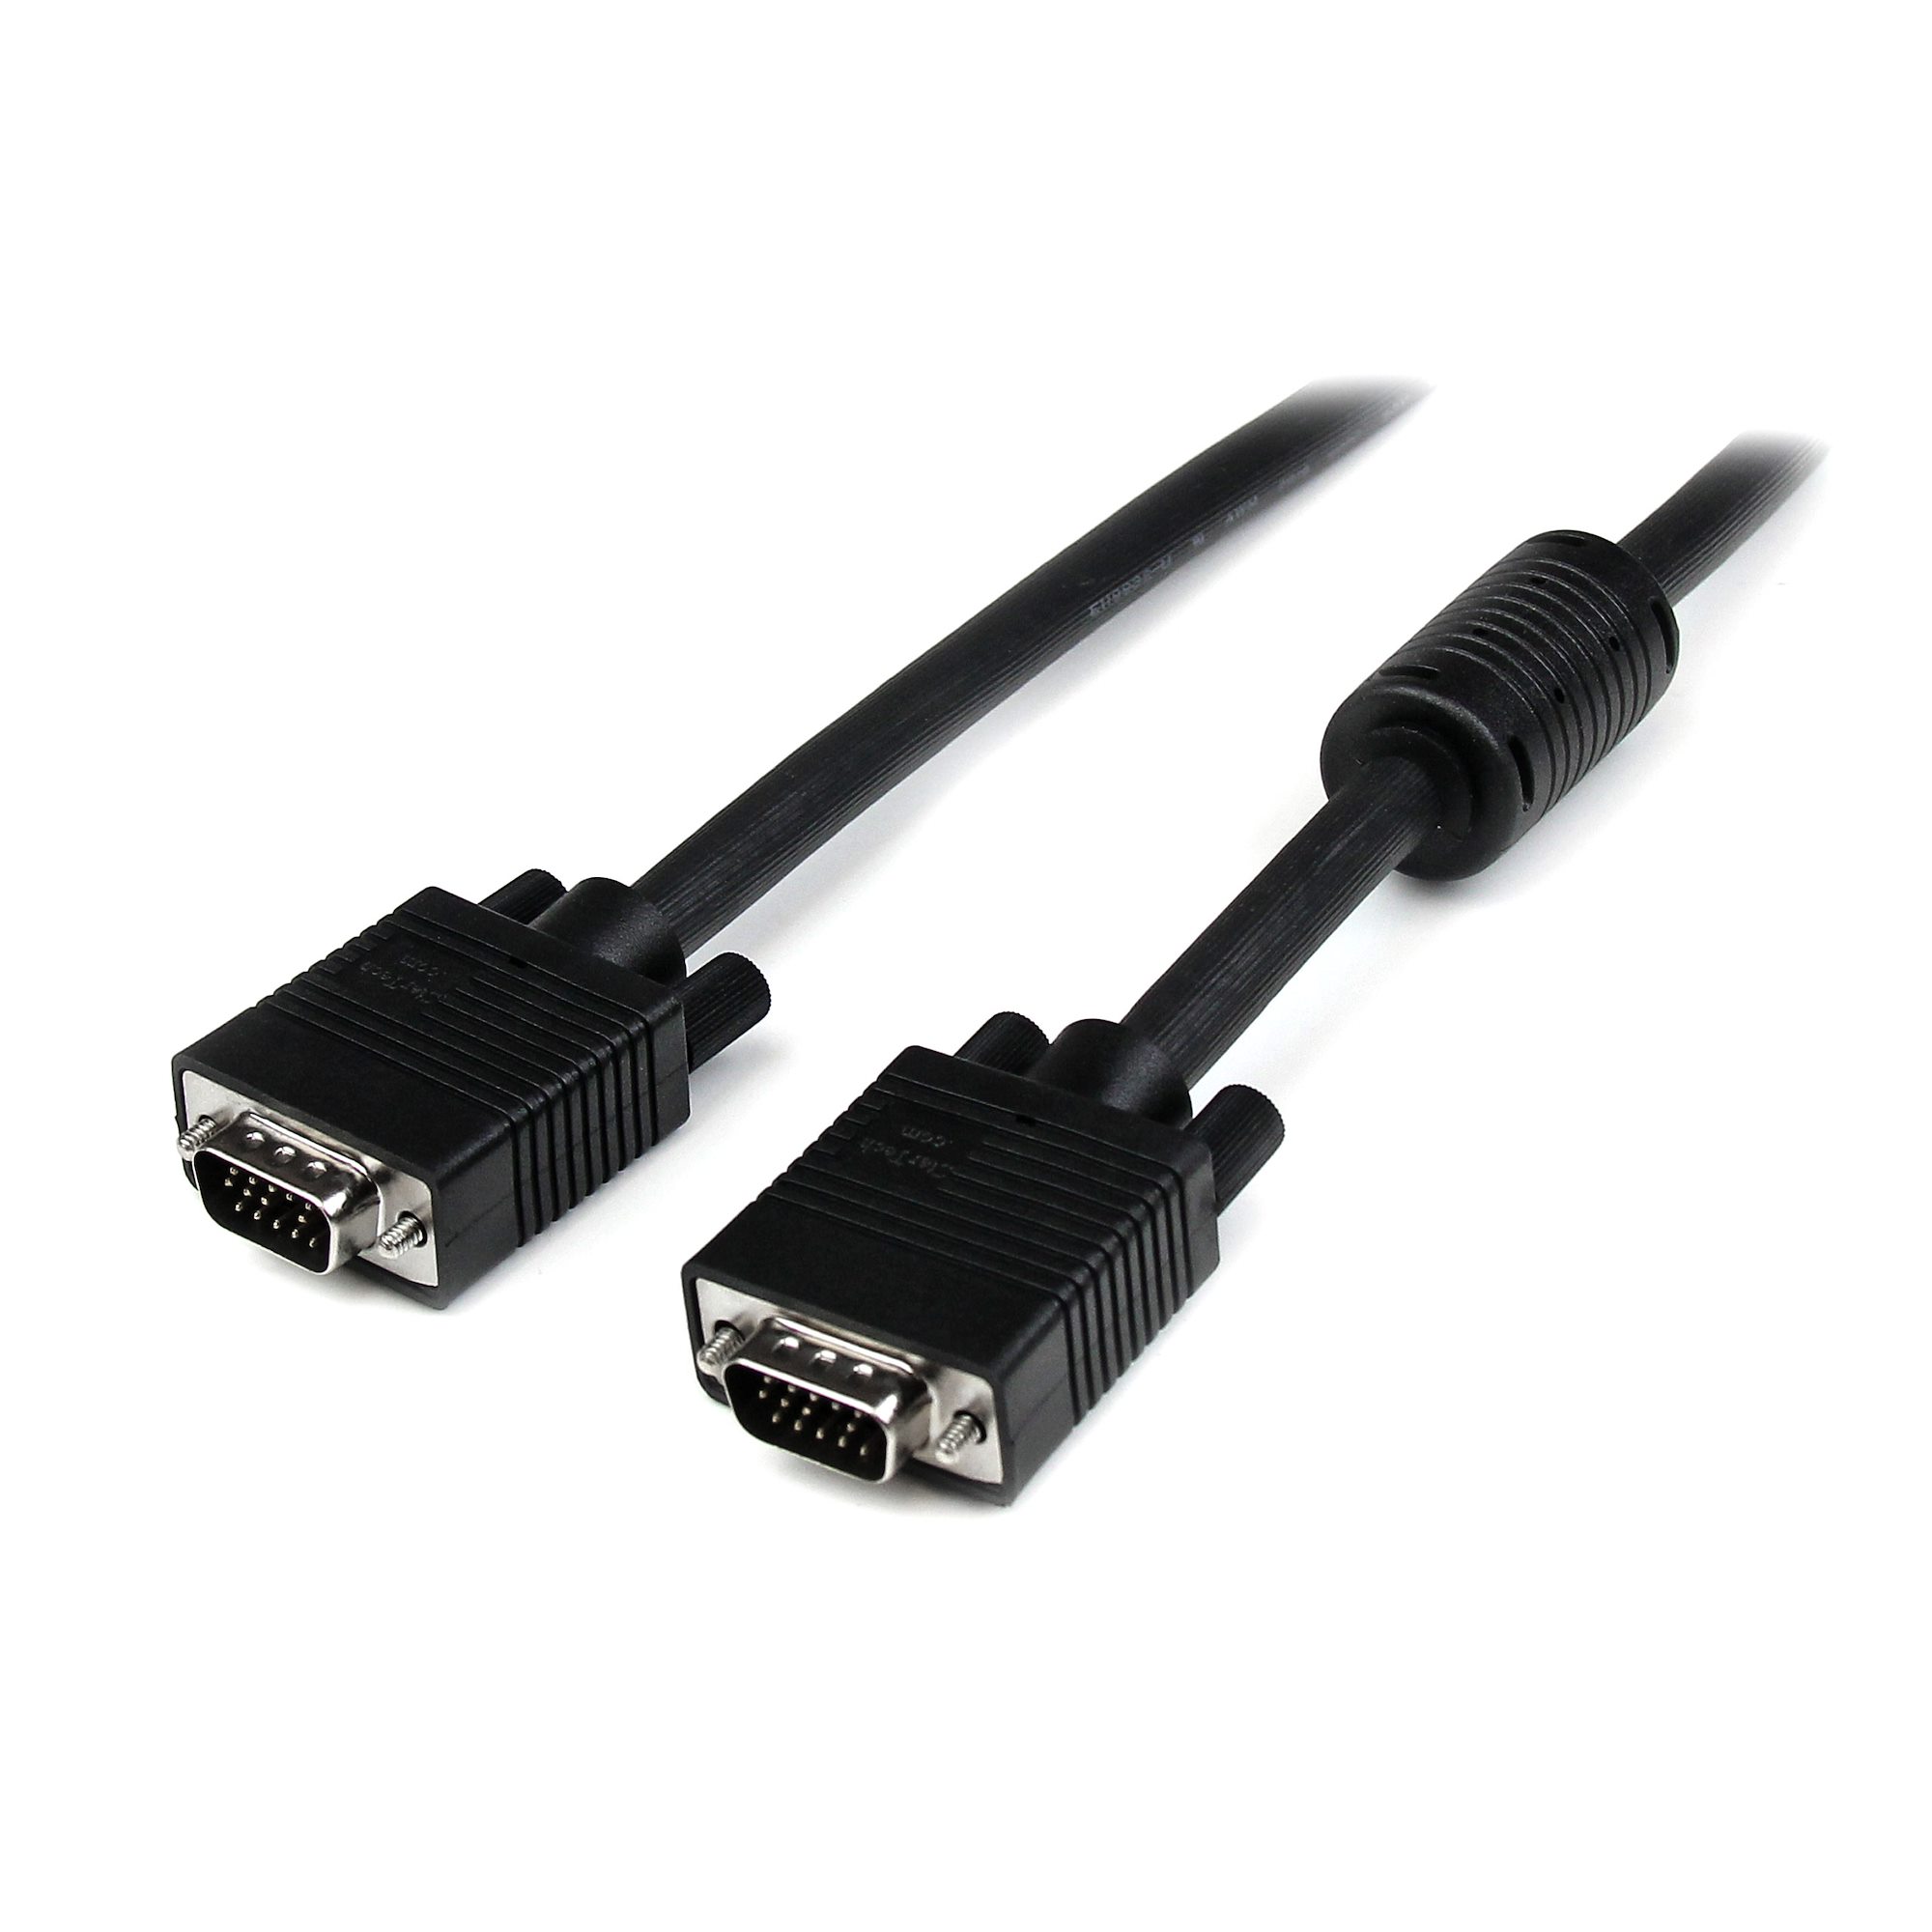 75ft Coax High Resolution Monitor VGA Cable - HD15 M/M